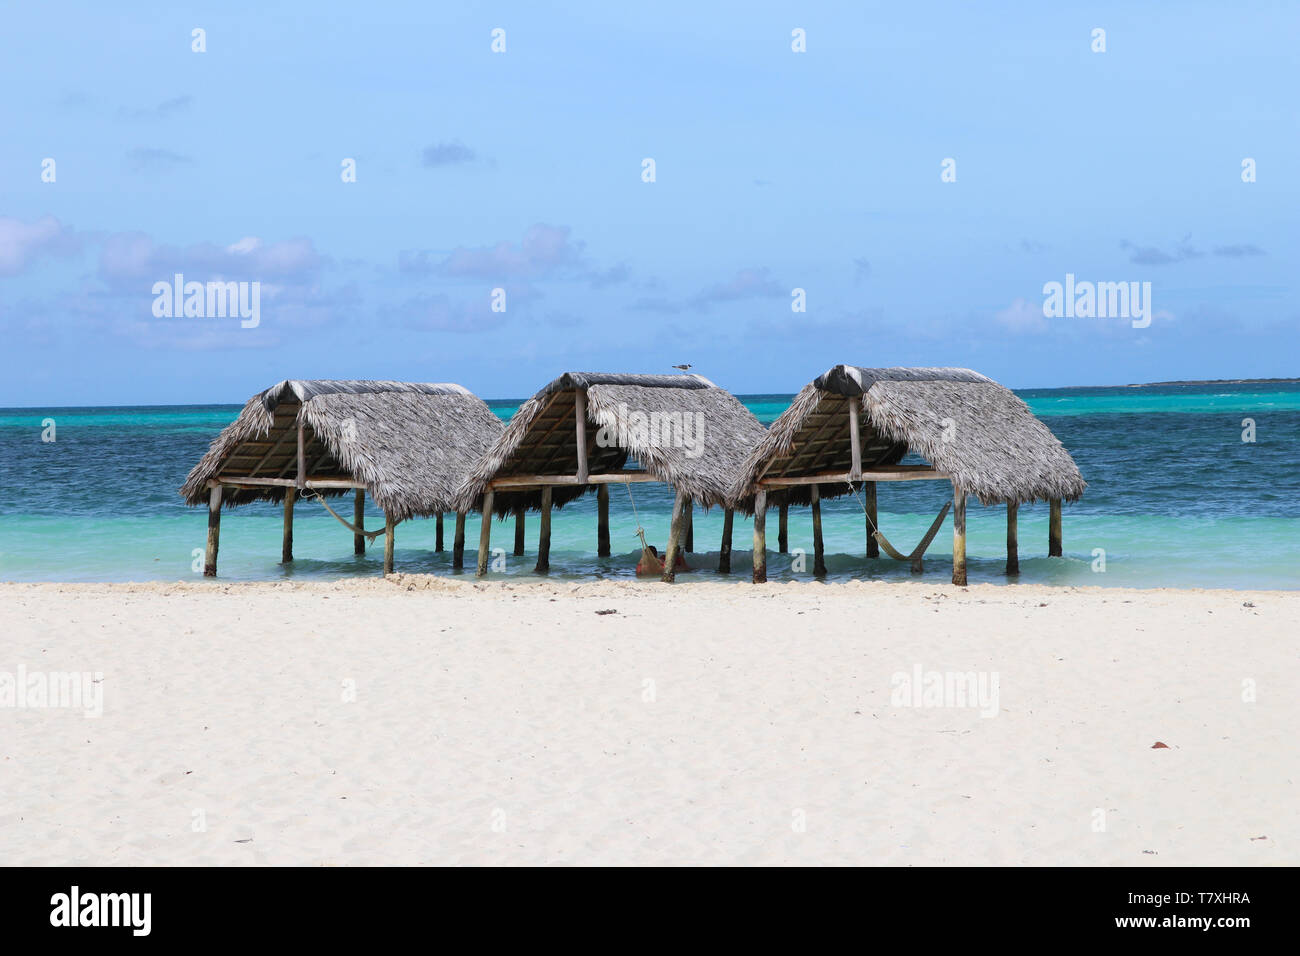 Thatched roof huts on paradise beach Stock Photo